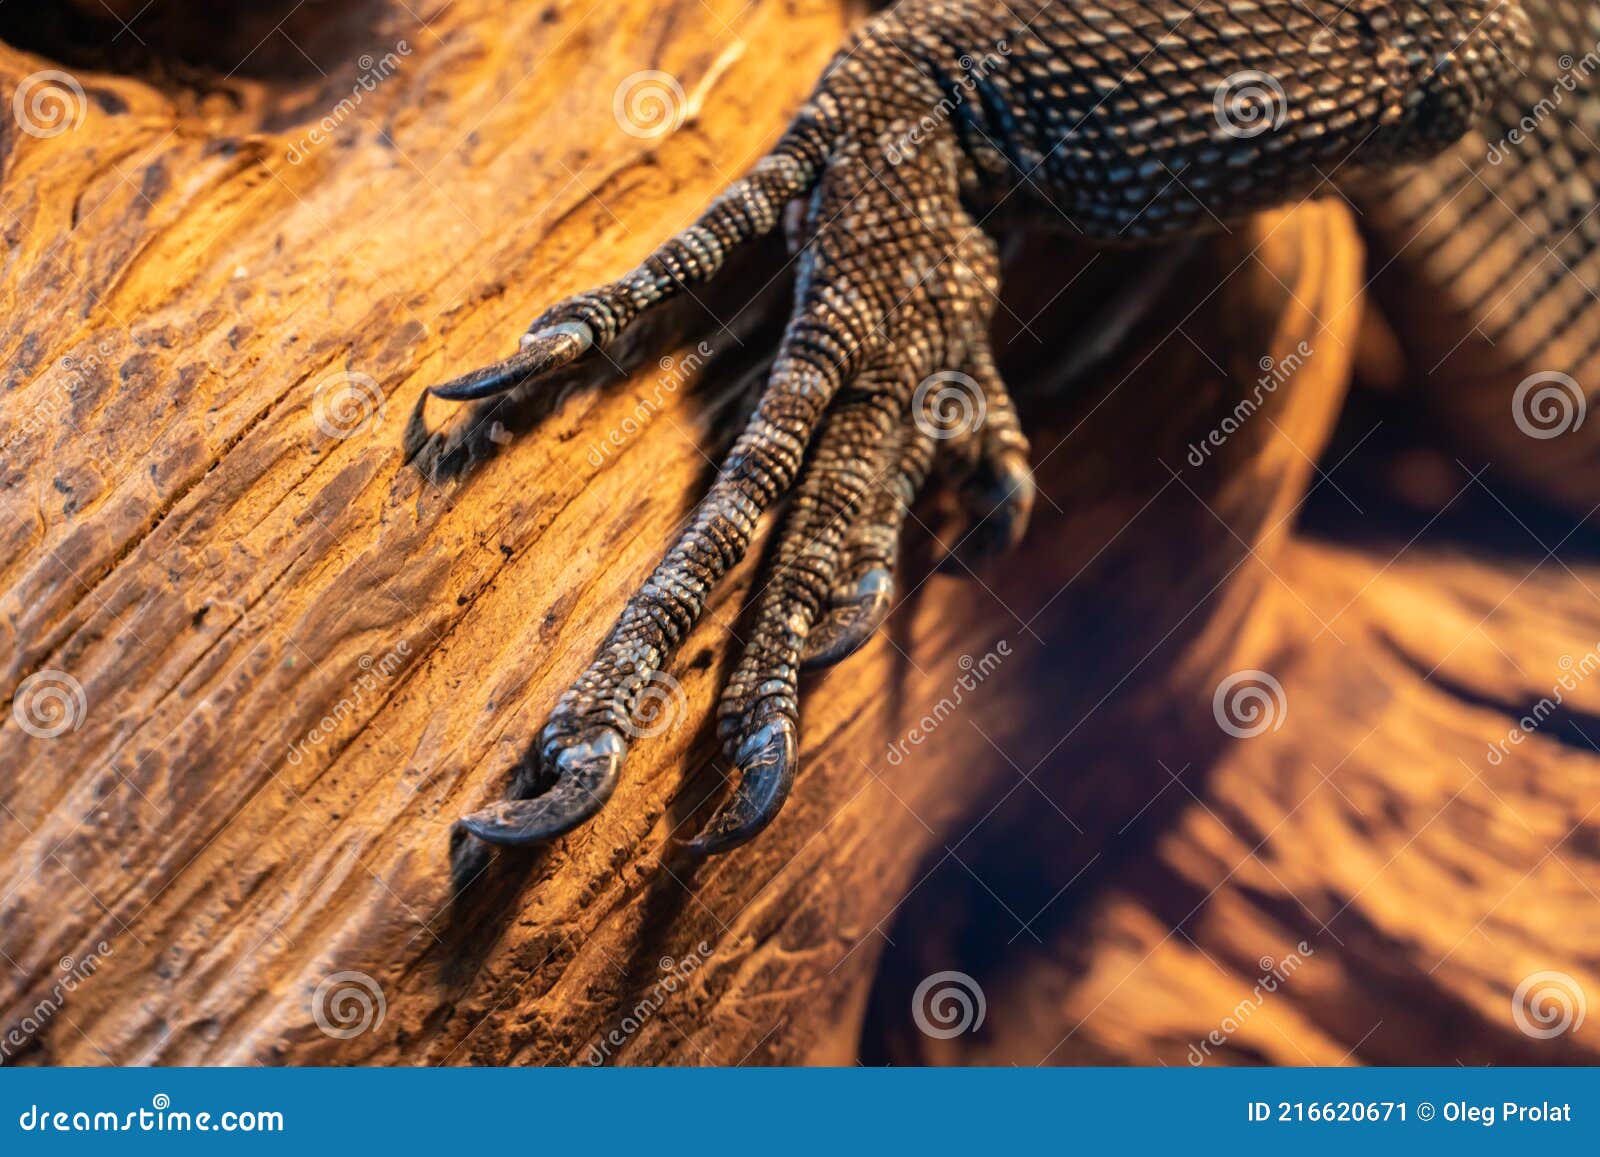 Kvittering Metafor Alle slags 155 Gecko Paw Photos - Free & Royalty-Free Stock Photos from Dreamstime